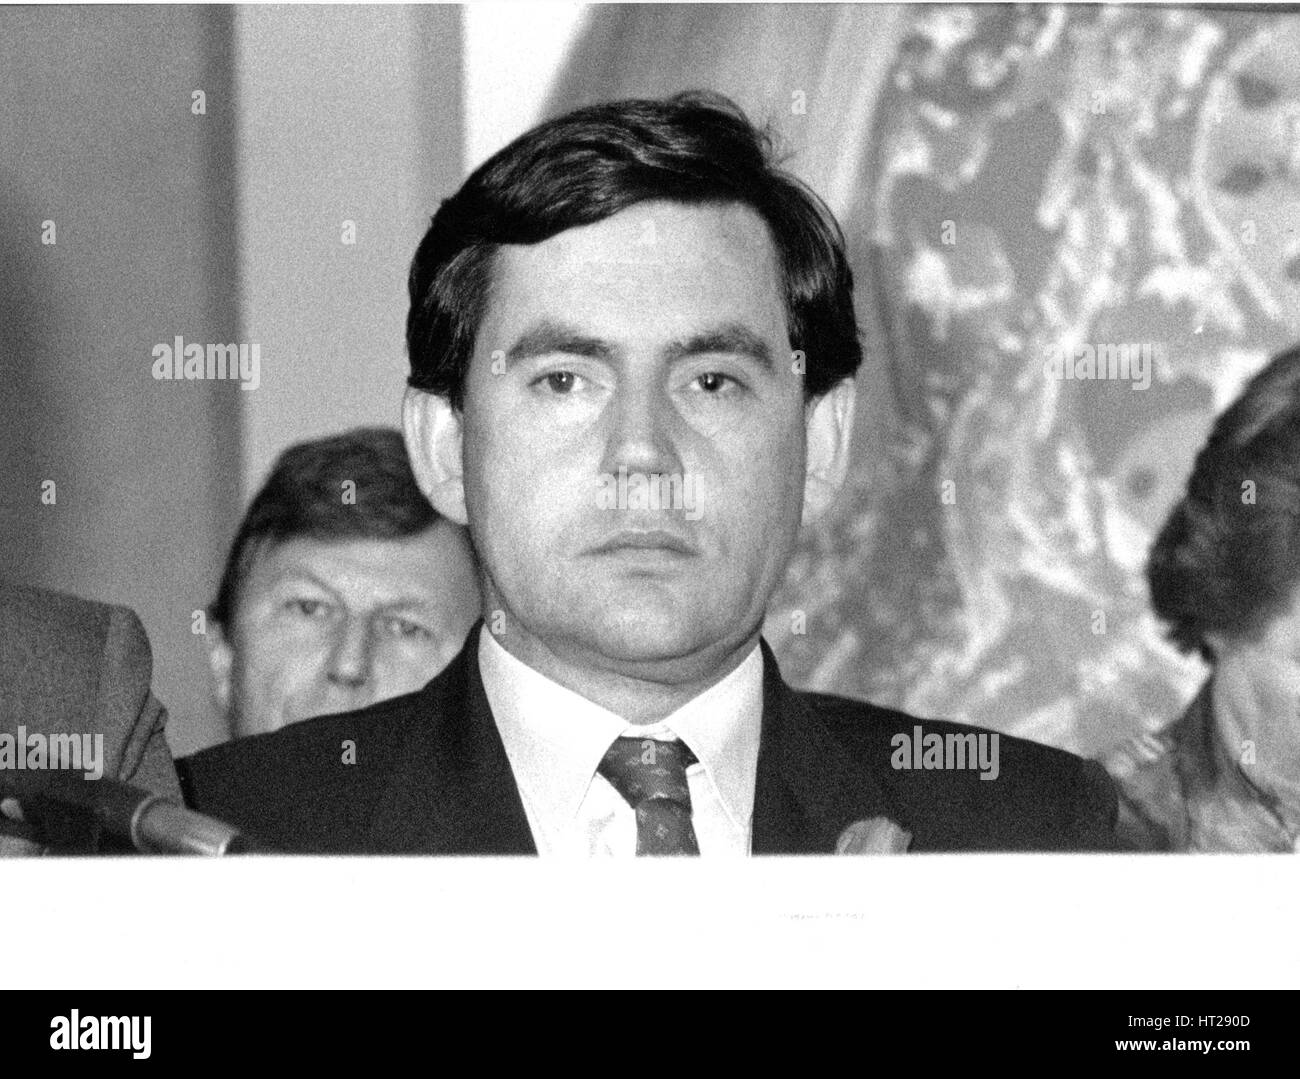 Gordon Brown, Labour party Member of Parliament for Dunfermiline East, attends a policy launch press conference in London, England on May 24, 1990. He later became party Leader and Prime Minister of Britain. Stock Photo